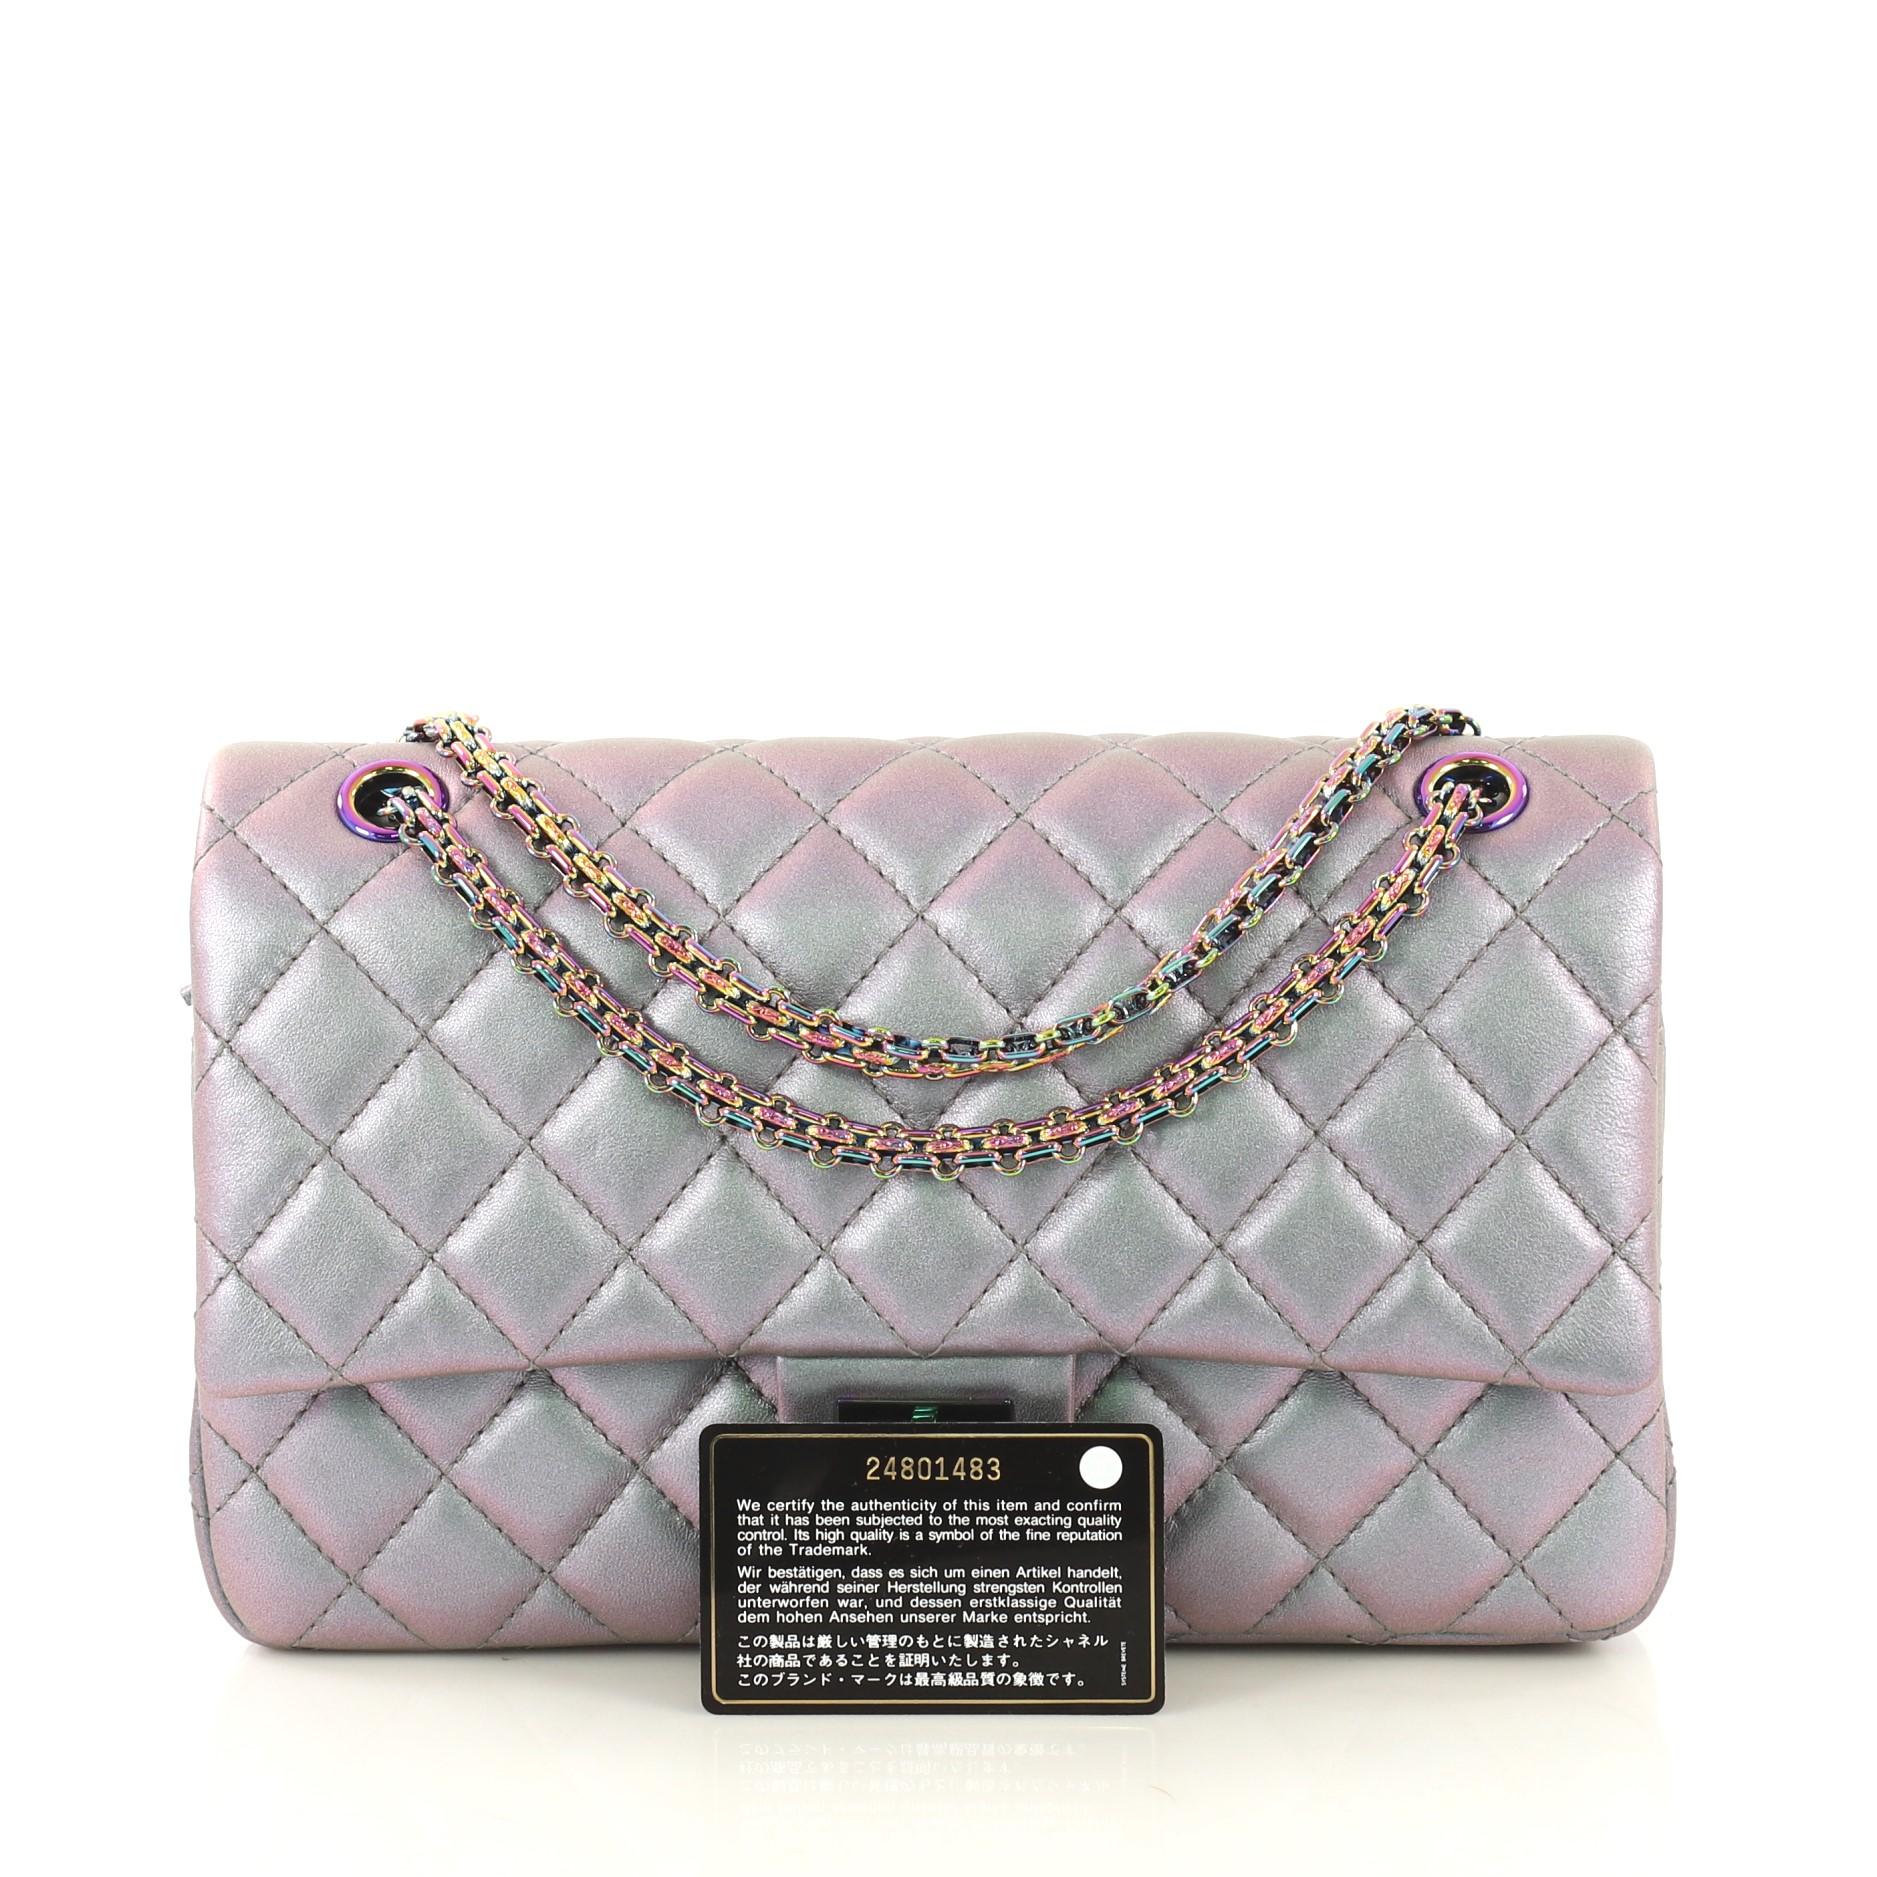 This Chanel Reissue 2.55 Flap Bag Quilted Iridescent Lambskin 226, crafted in purple quilted iridescent lambskin leather, features reissue chain strap, front flap and iridescent tone hardware. Its mademoiselle turn-lock closure opens to a purple